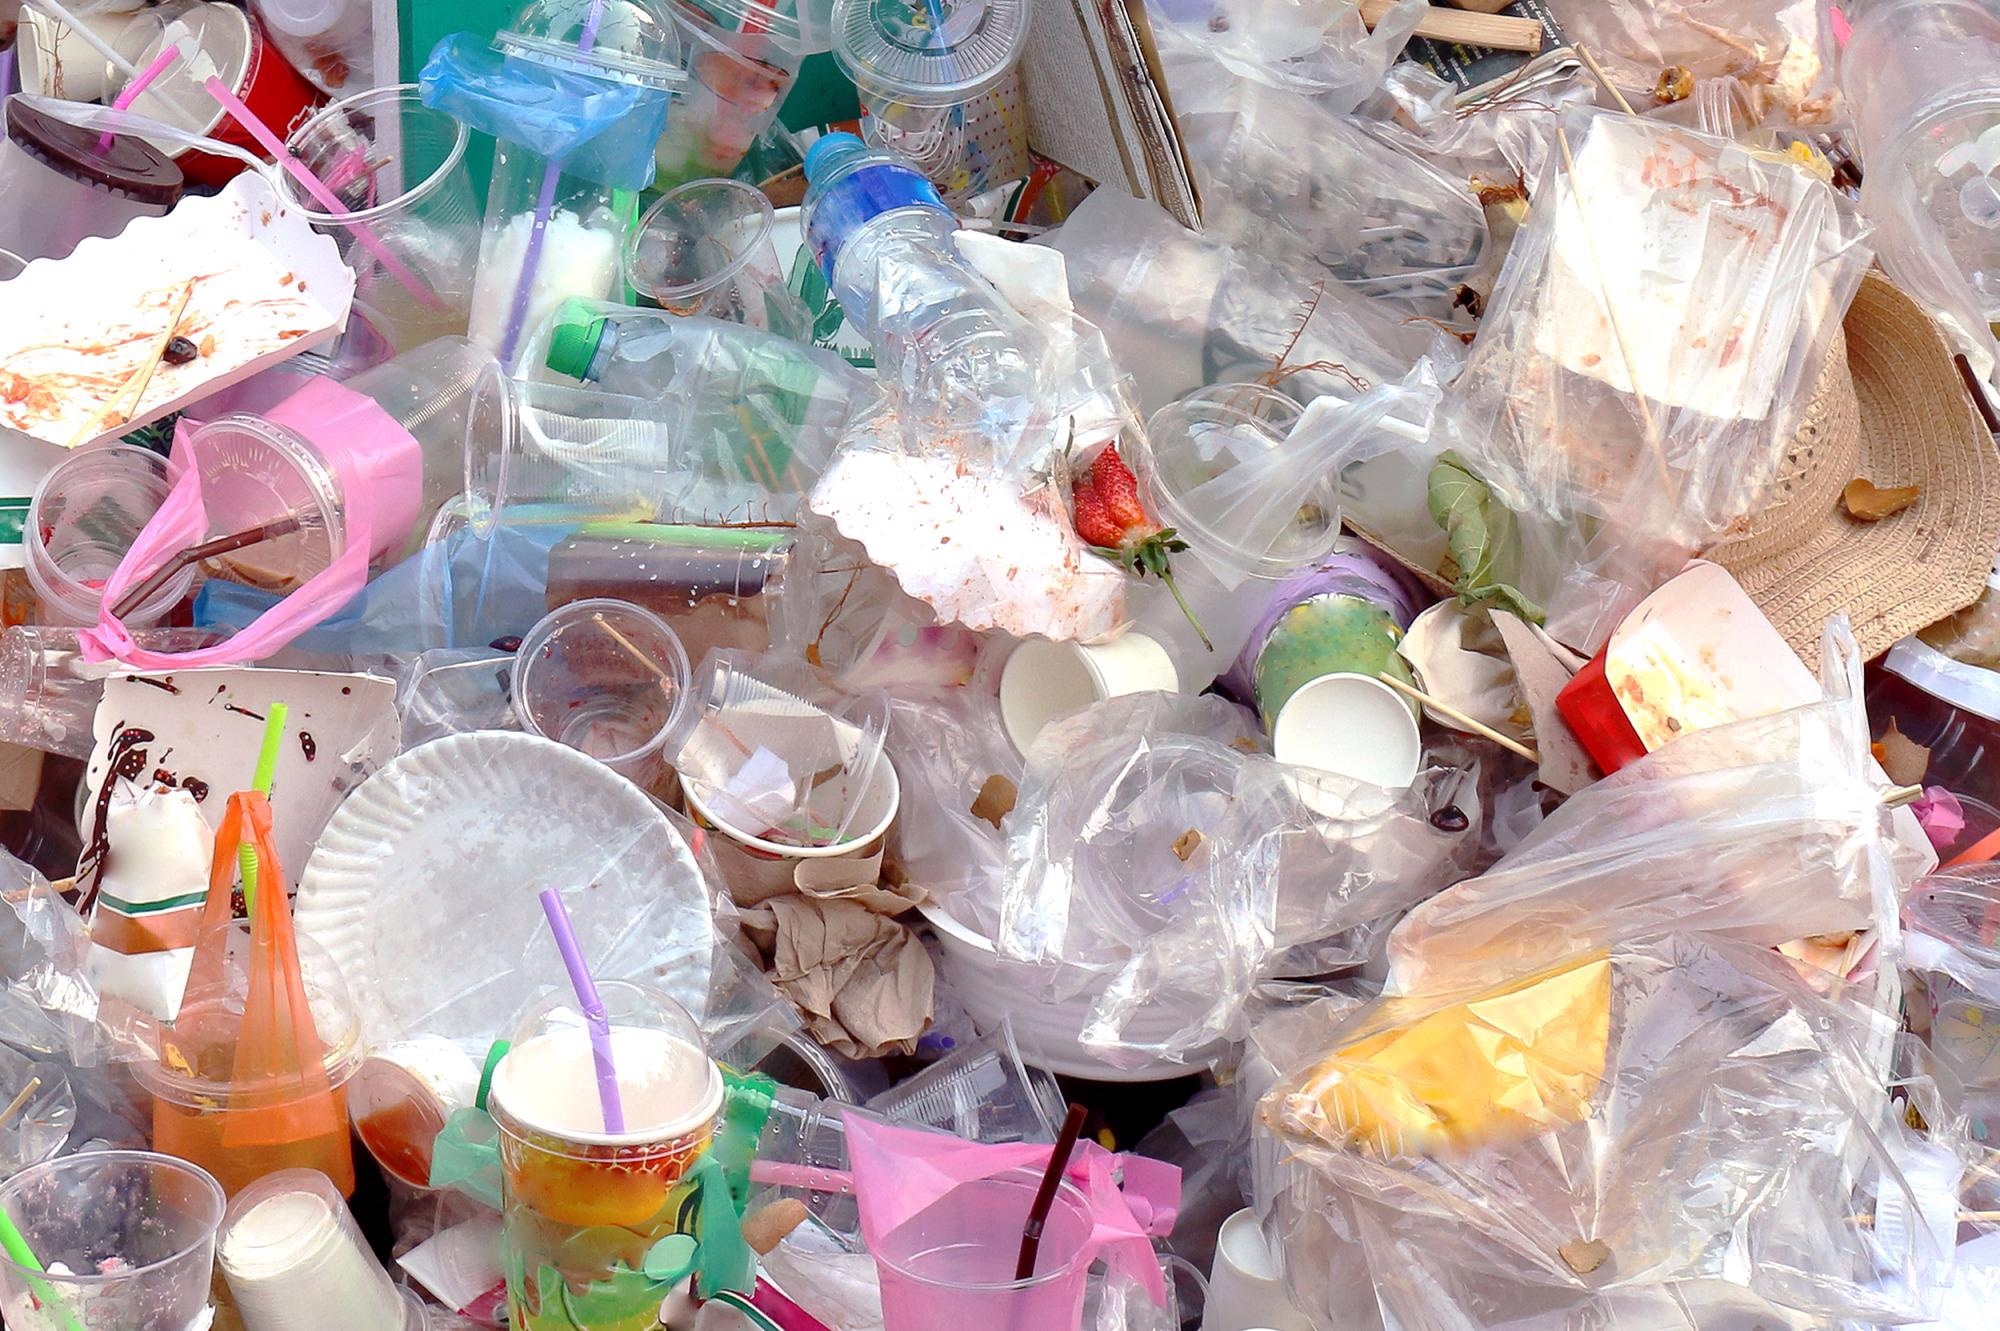 Experts Gather to Discuss the Success of Policies Designed to Tackle the Global Plastic Pollution Crisis.